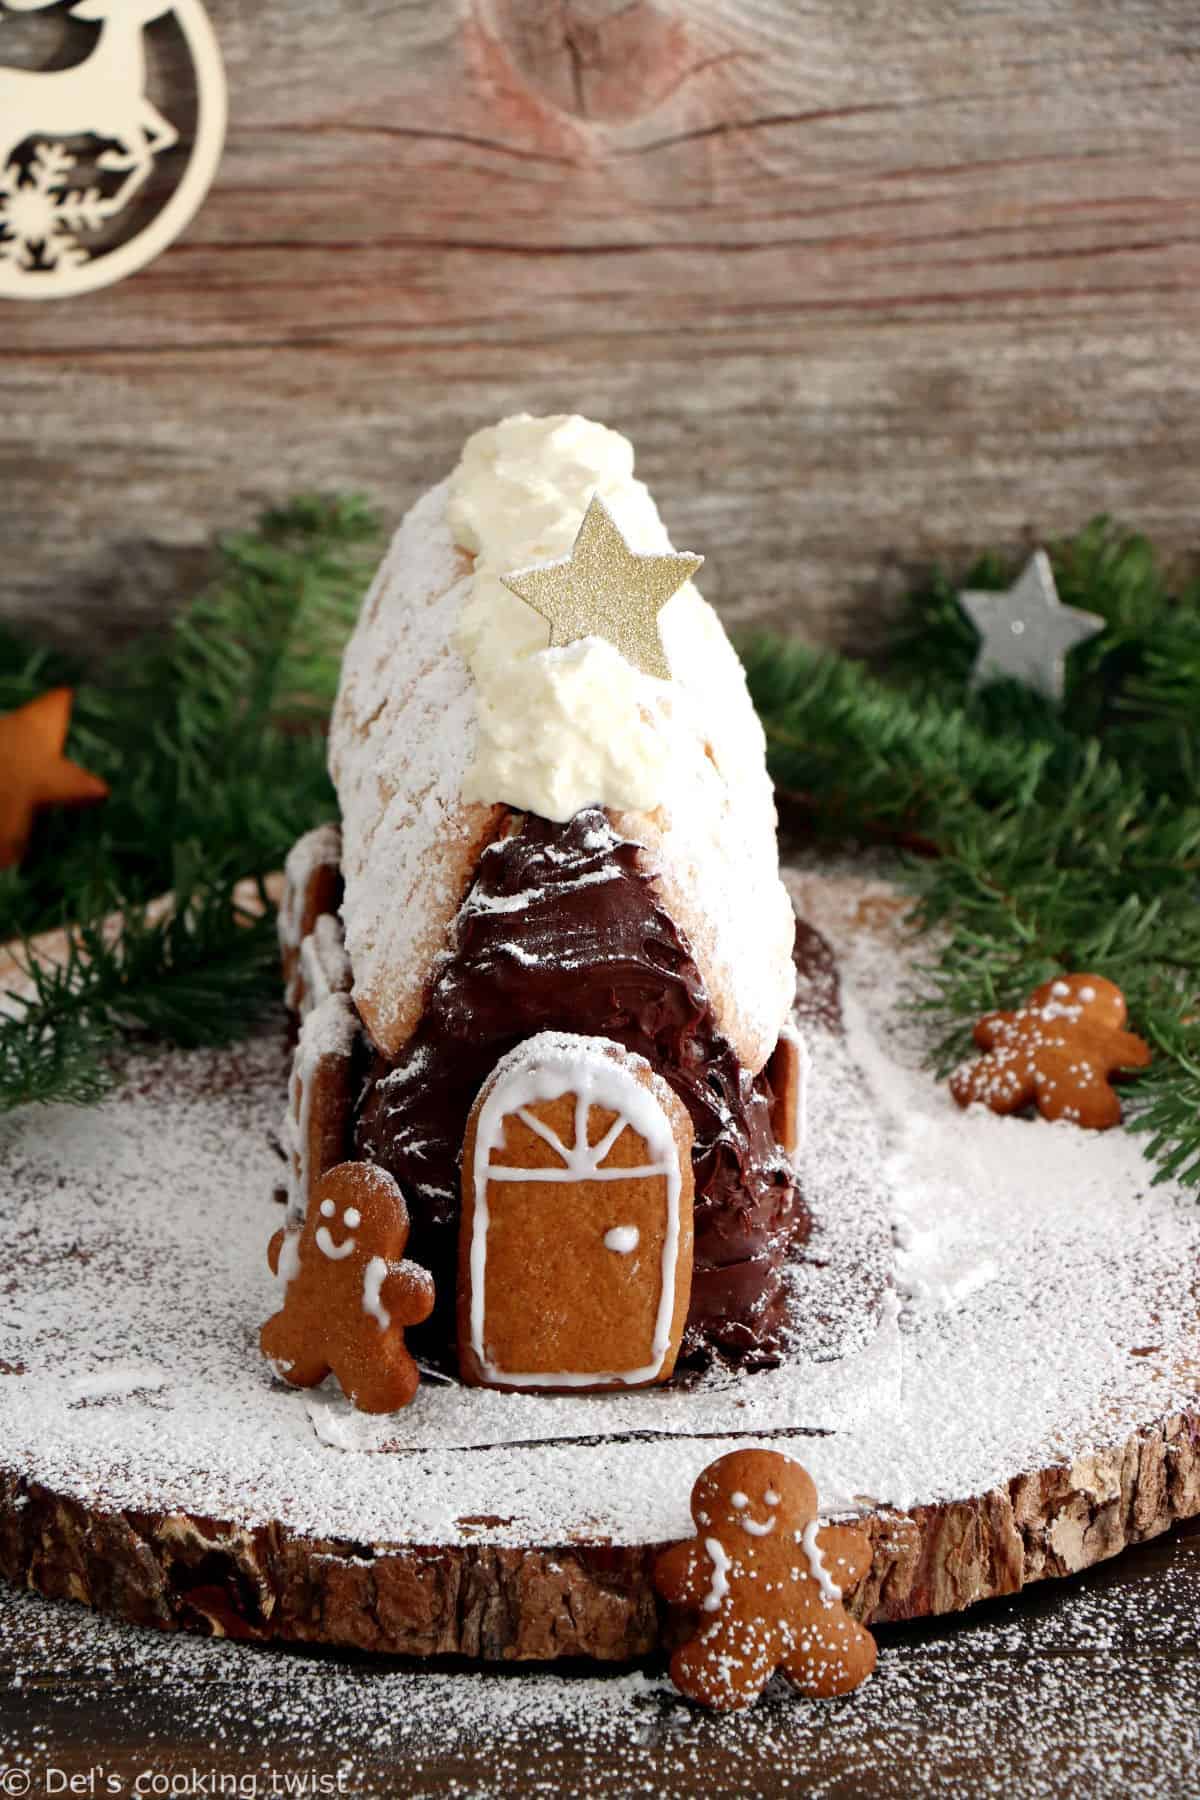 Tiramisu gingerbread house cake features a simple tiramisu in the shape of a house decorated with gingerbread. The perfect Christmas dessert!